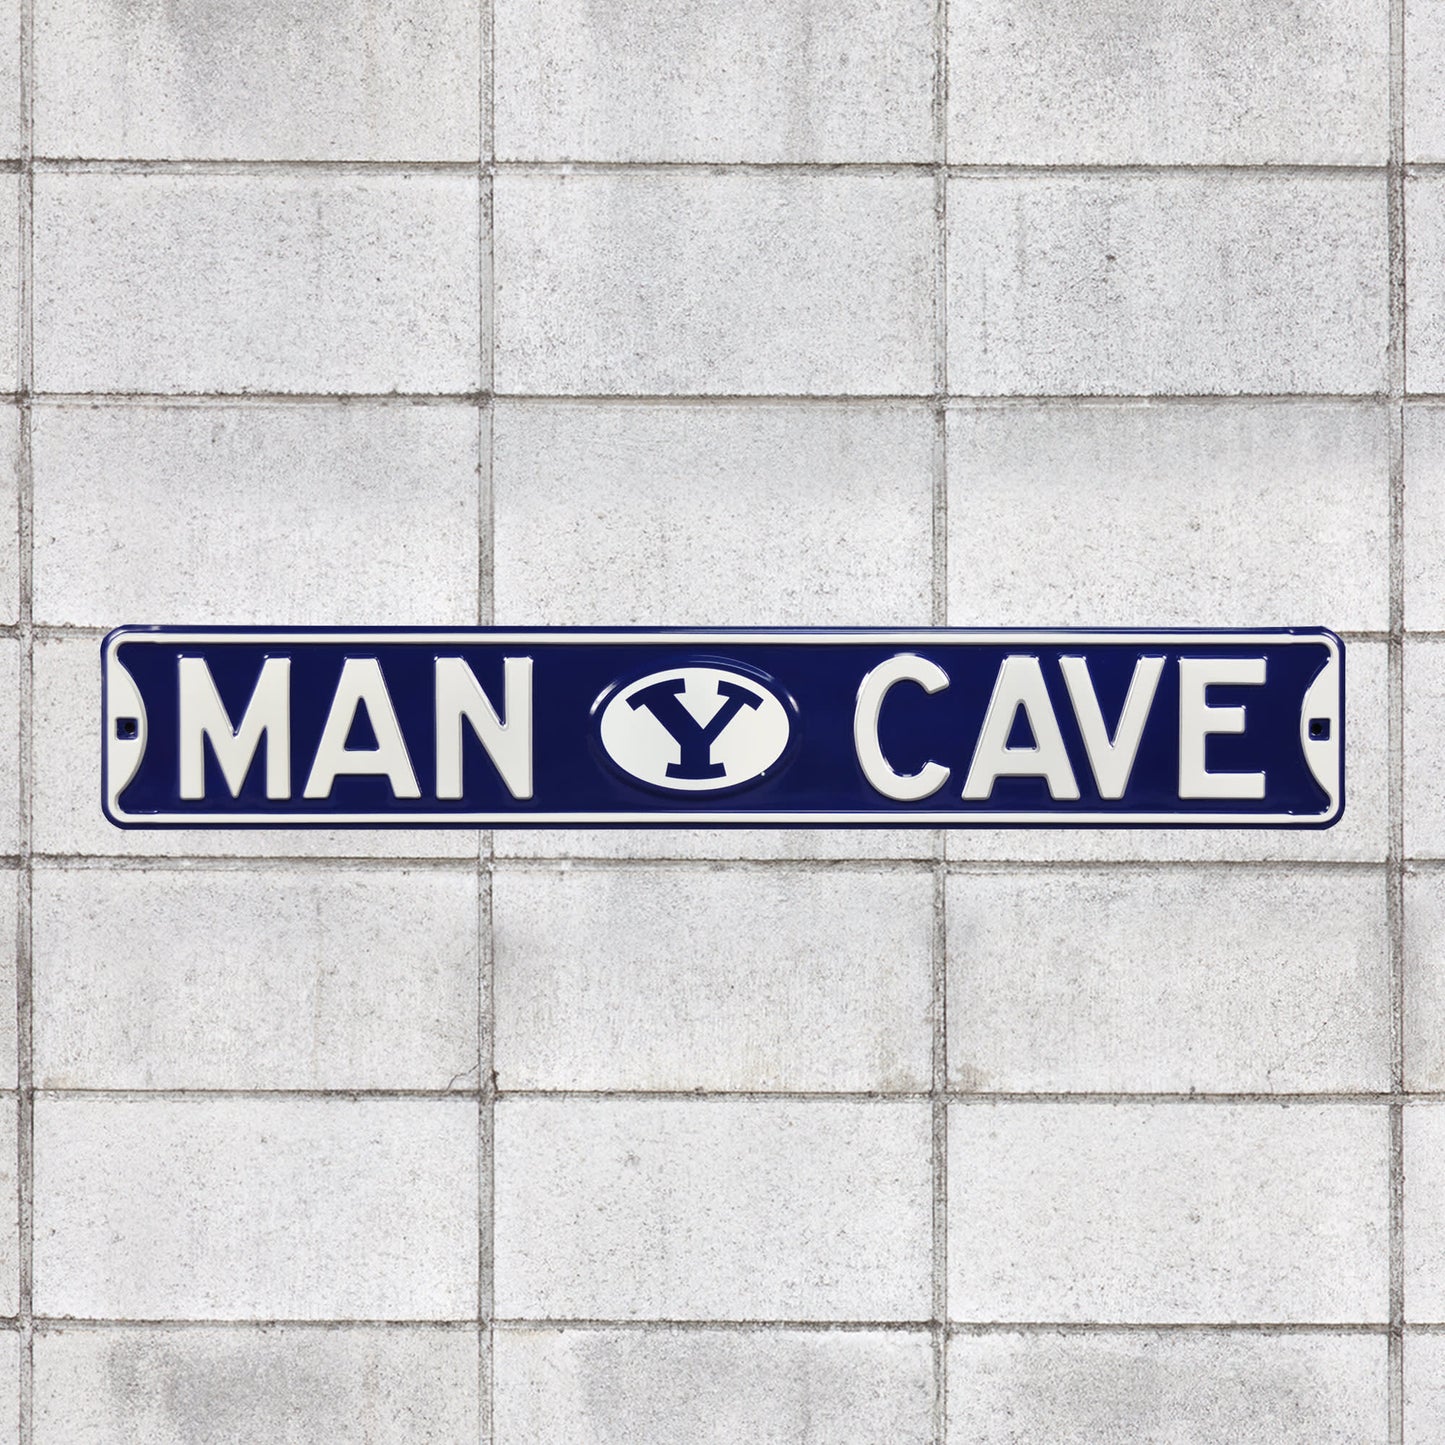 BYU Cougars: Man Cave - Officially Licensed Metal Street Sign